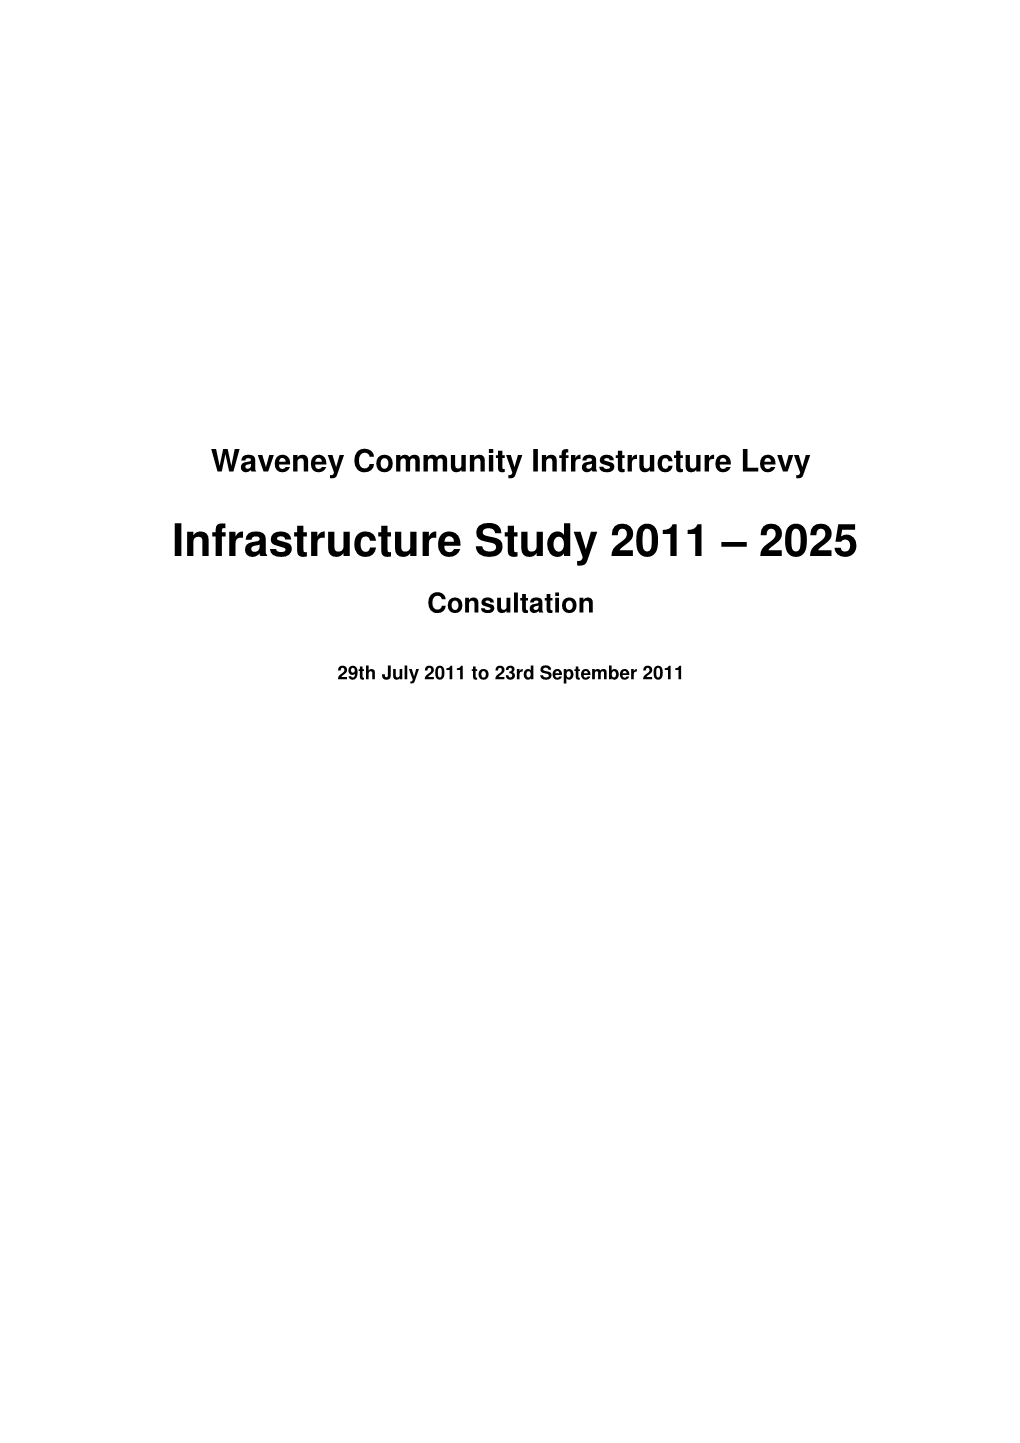 Infrastructure Study 2011 – 2025